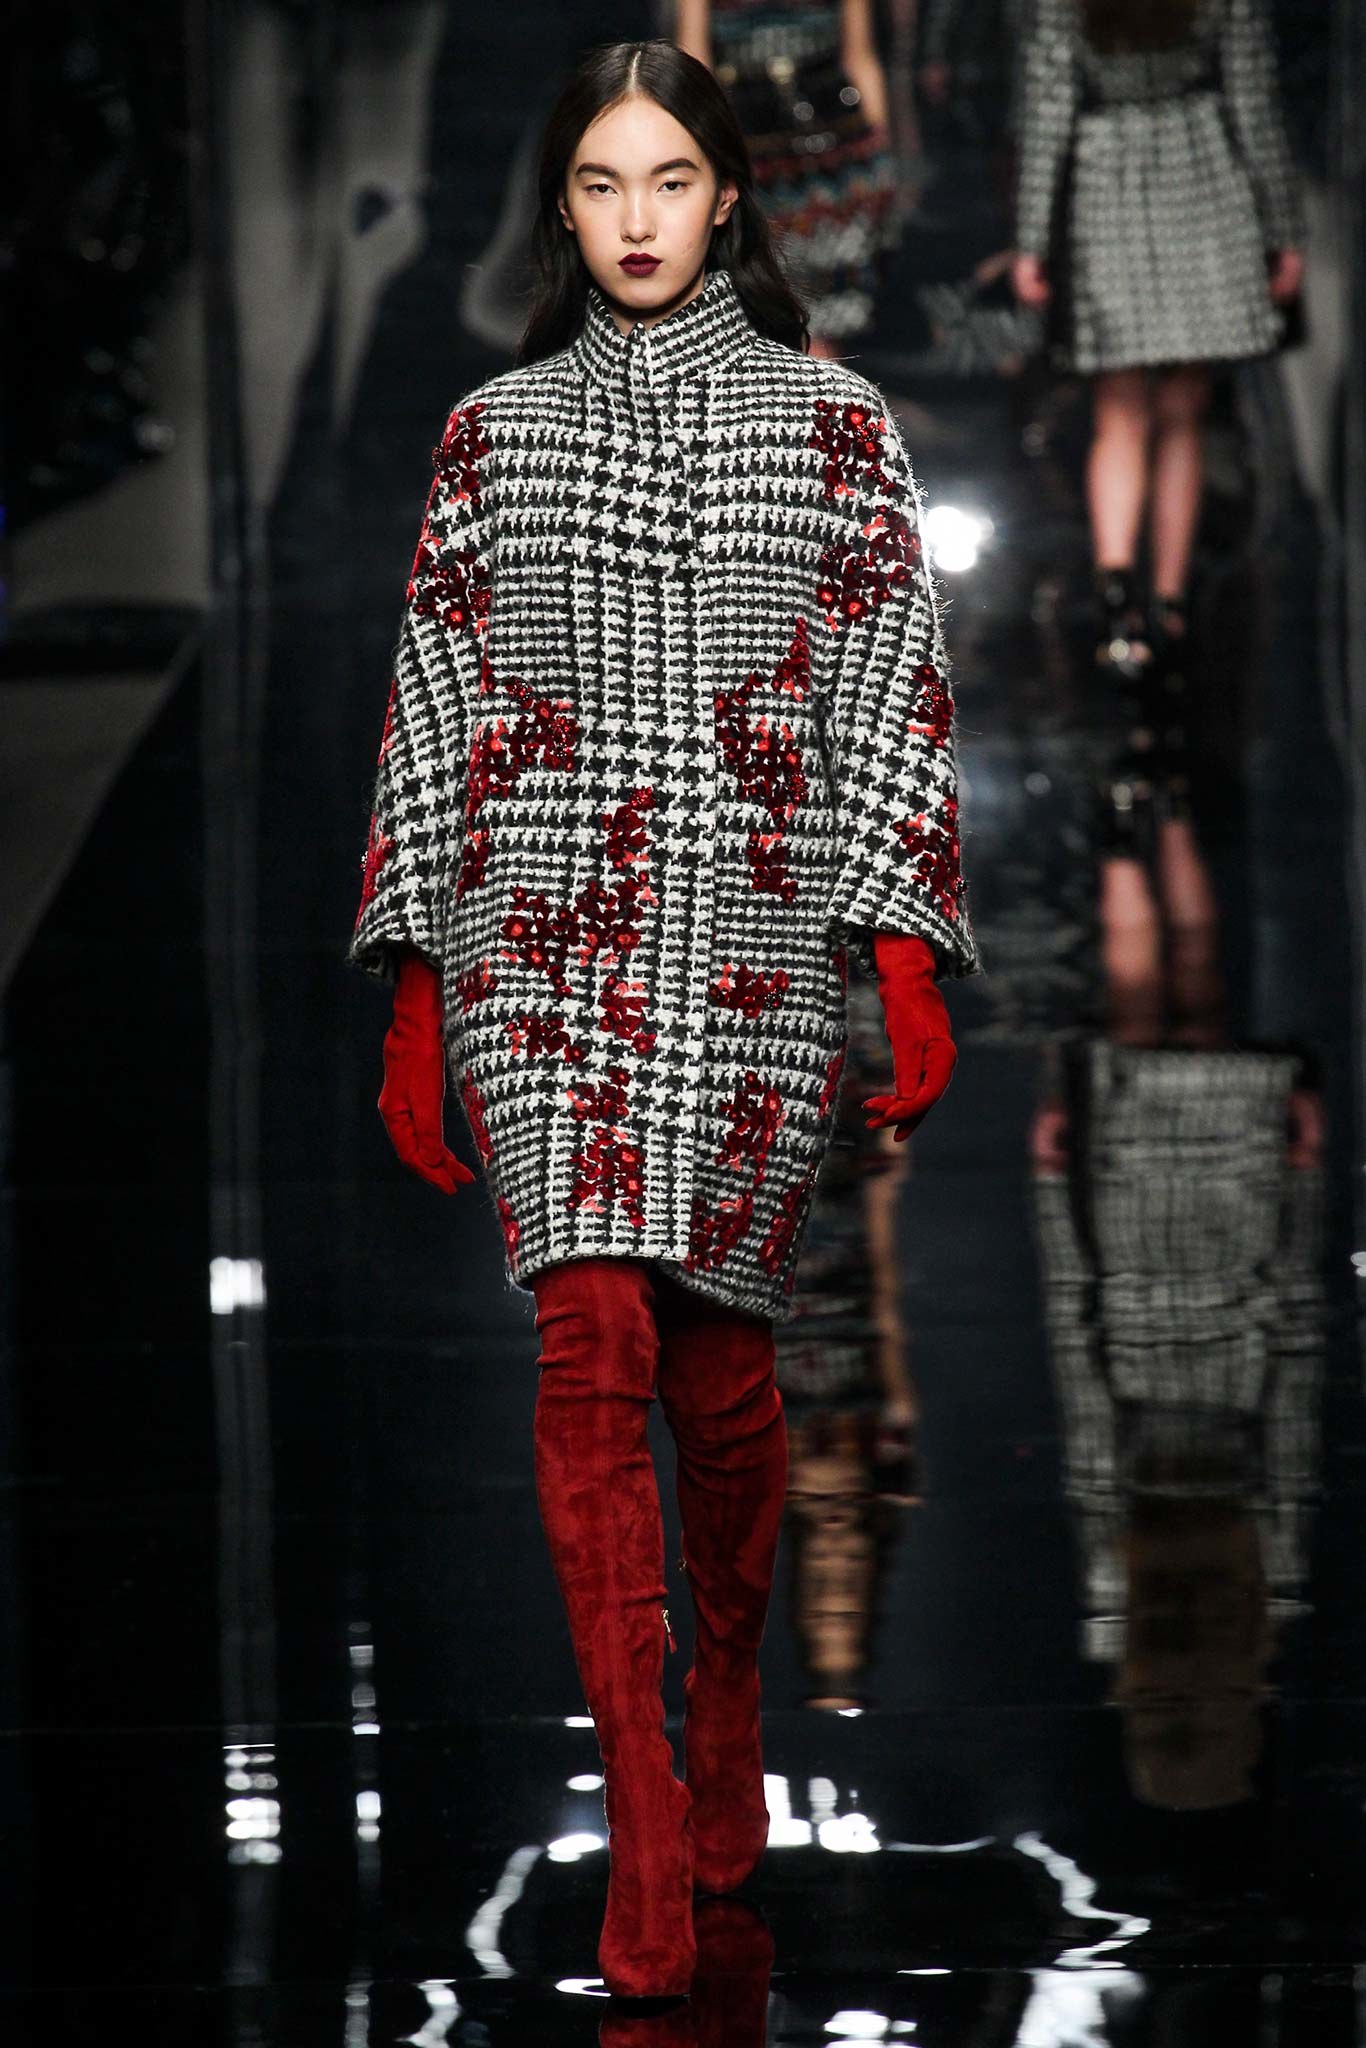 Fall Trends 2015 - Houndstooth Print - Fashionsizzle